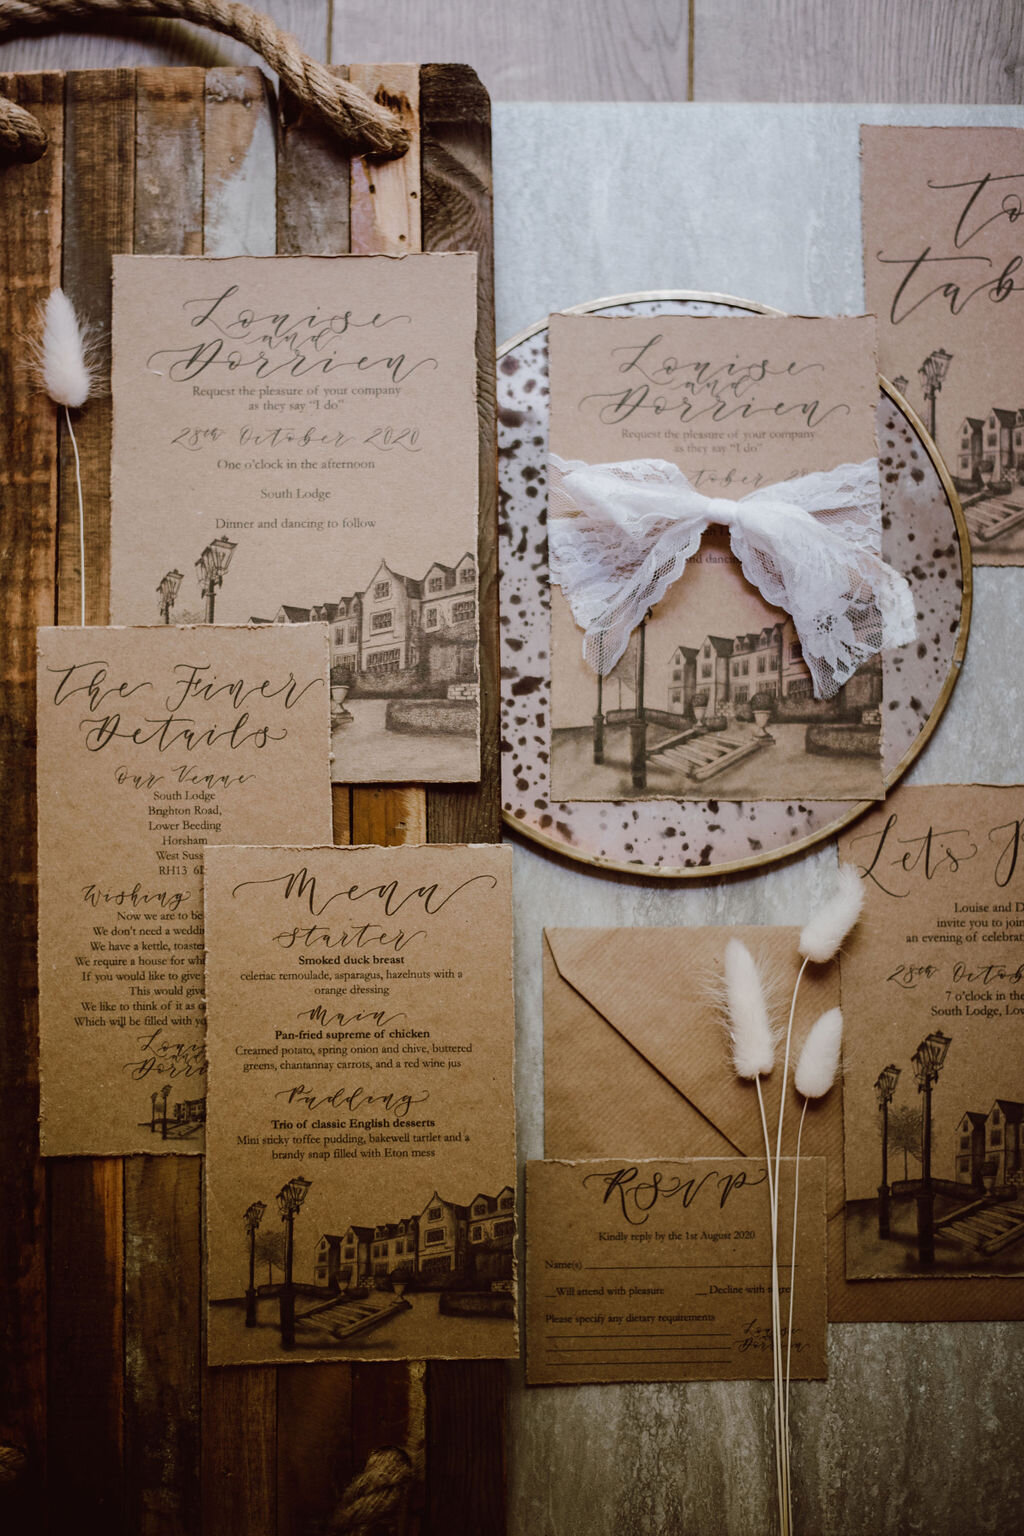 Rustic recycled paper wedding stationery suite by The Amyverse for South Lodge including calligraphy, venue illustration and kraft paper.jpg